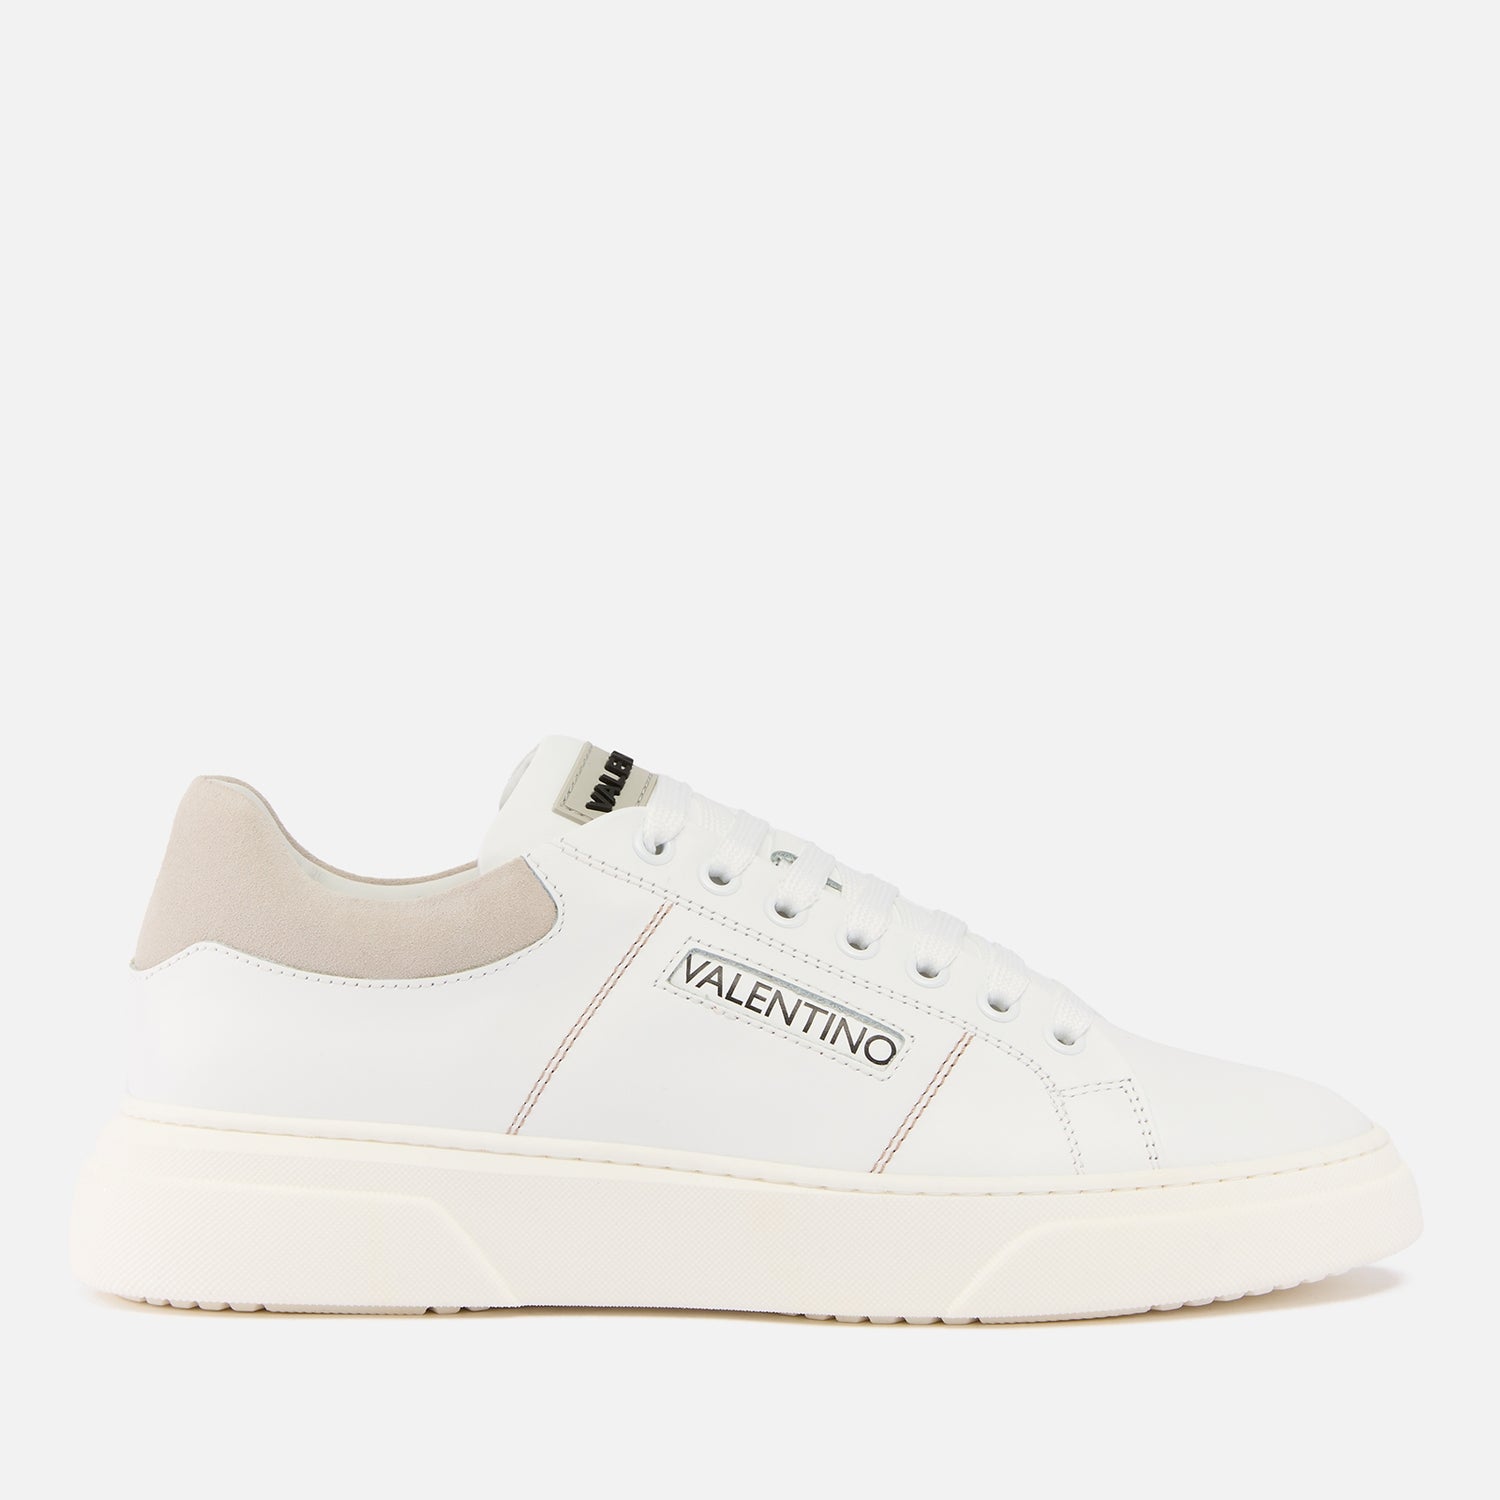 Valentino Men's Stan S Leather Cupsole Trainers - 7